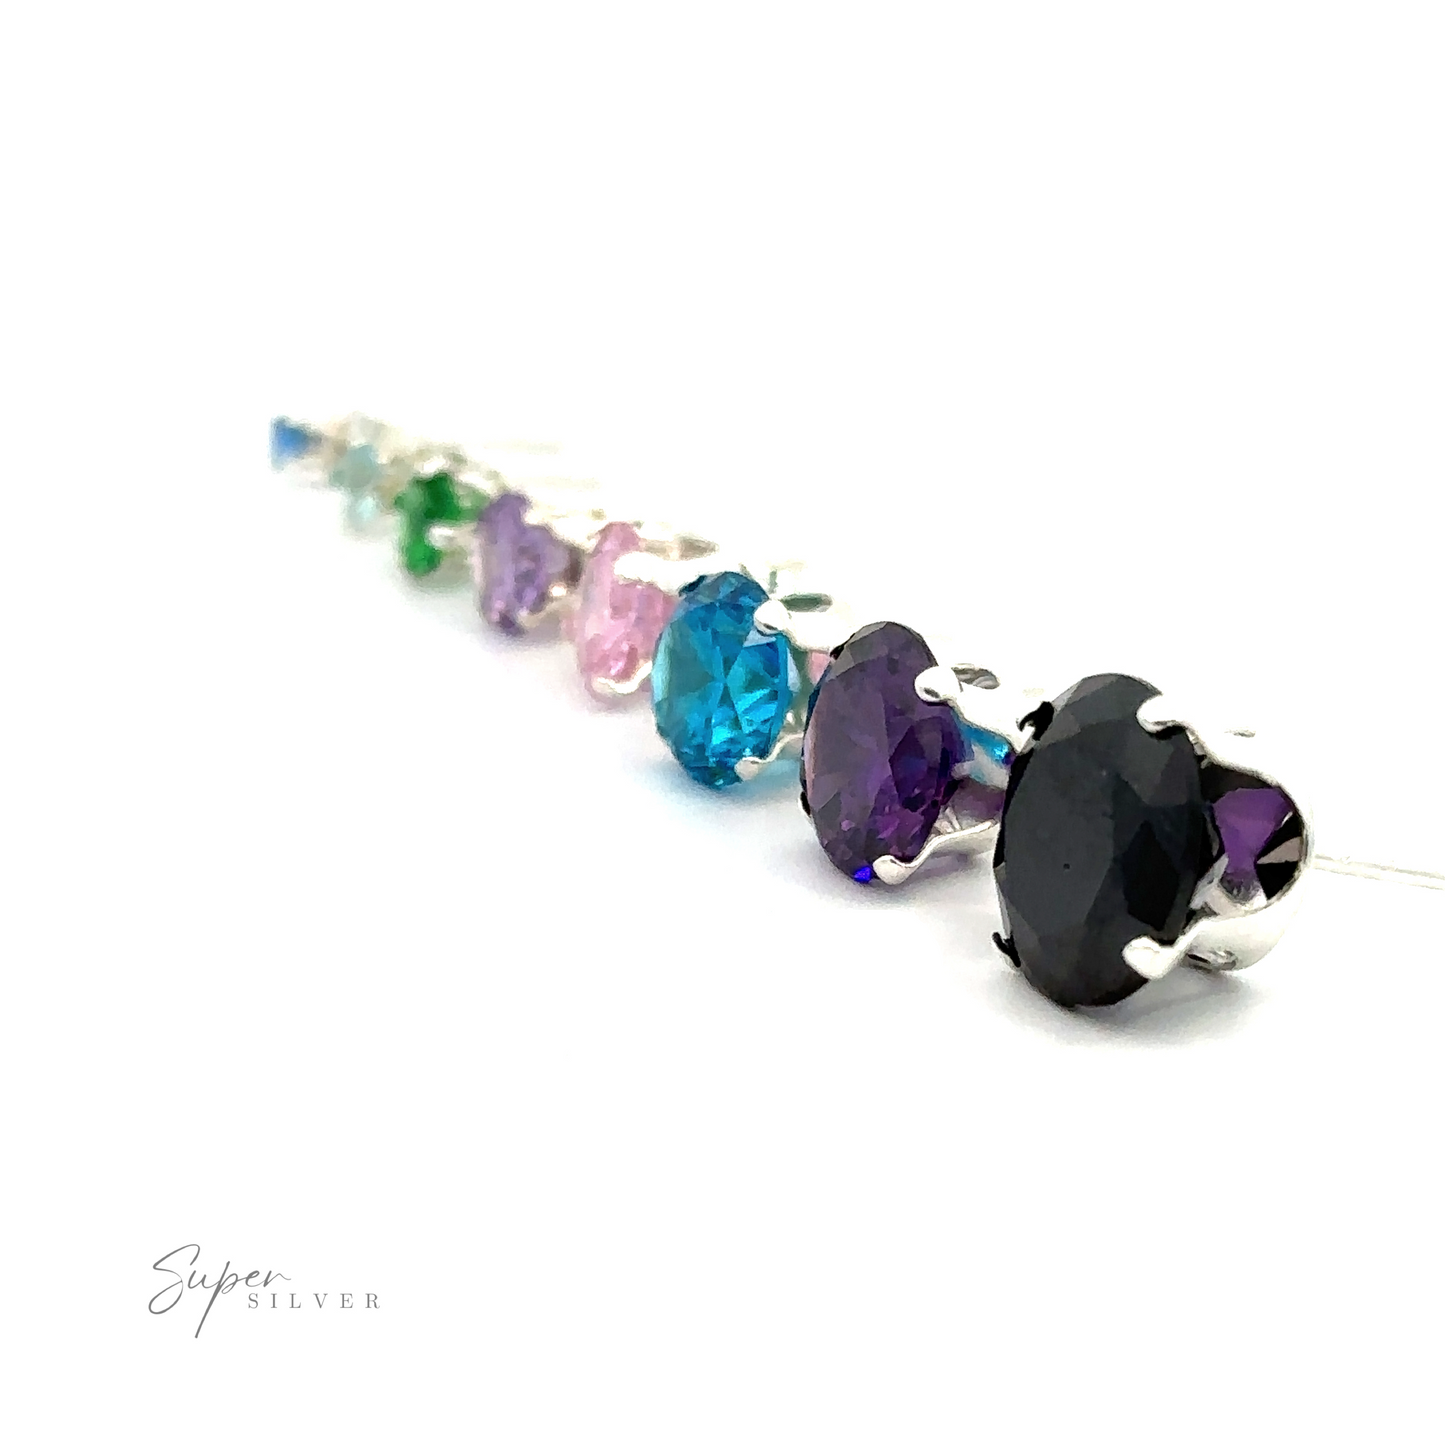 A row of colorful, teardrop-shaped Round CZ Studs arranged in a gradient on a white background.